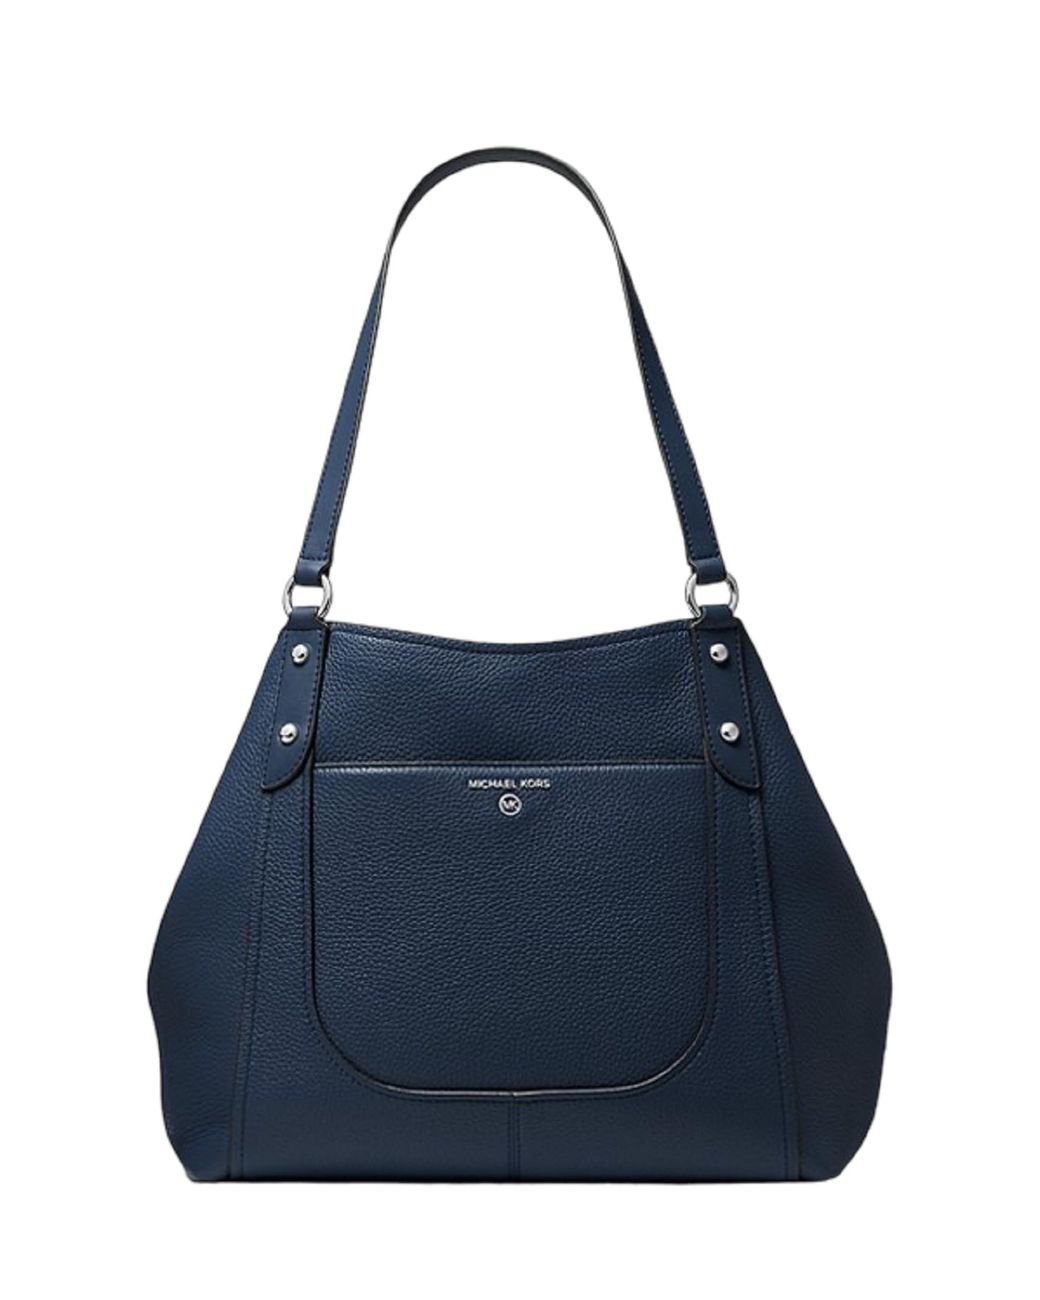 Michael Kors Molly Large Pebbled Leather Tote Bag in Blue | Lyst UK